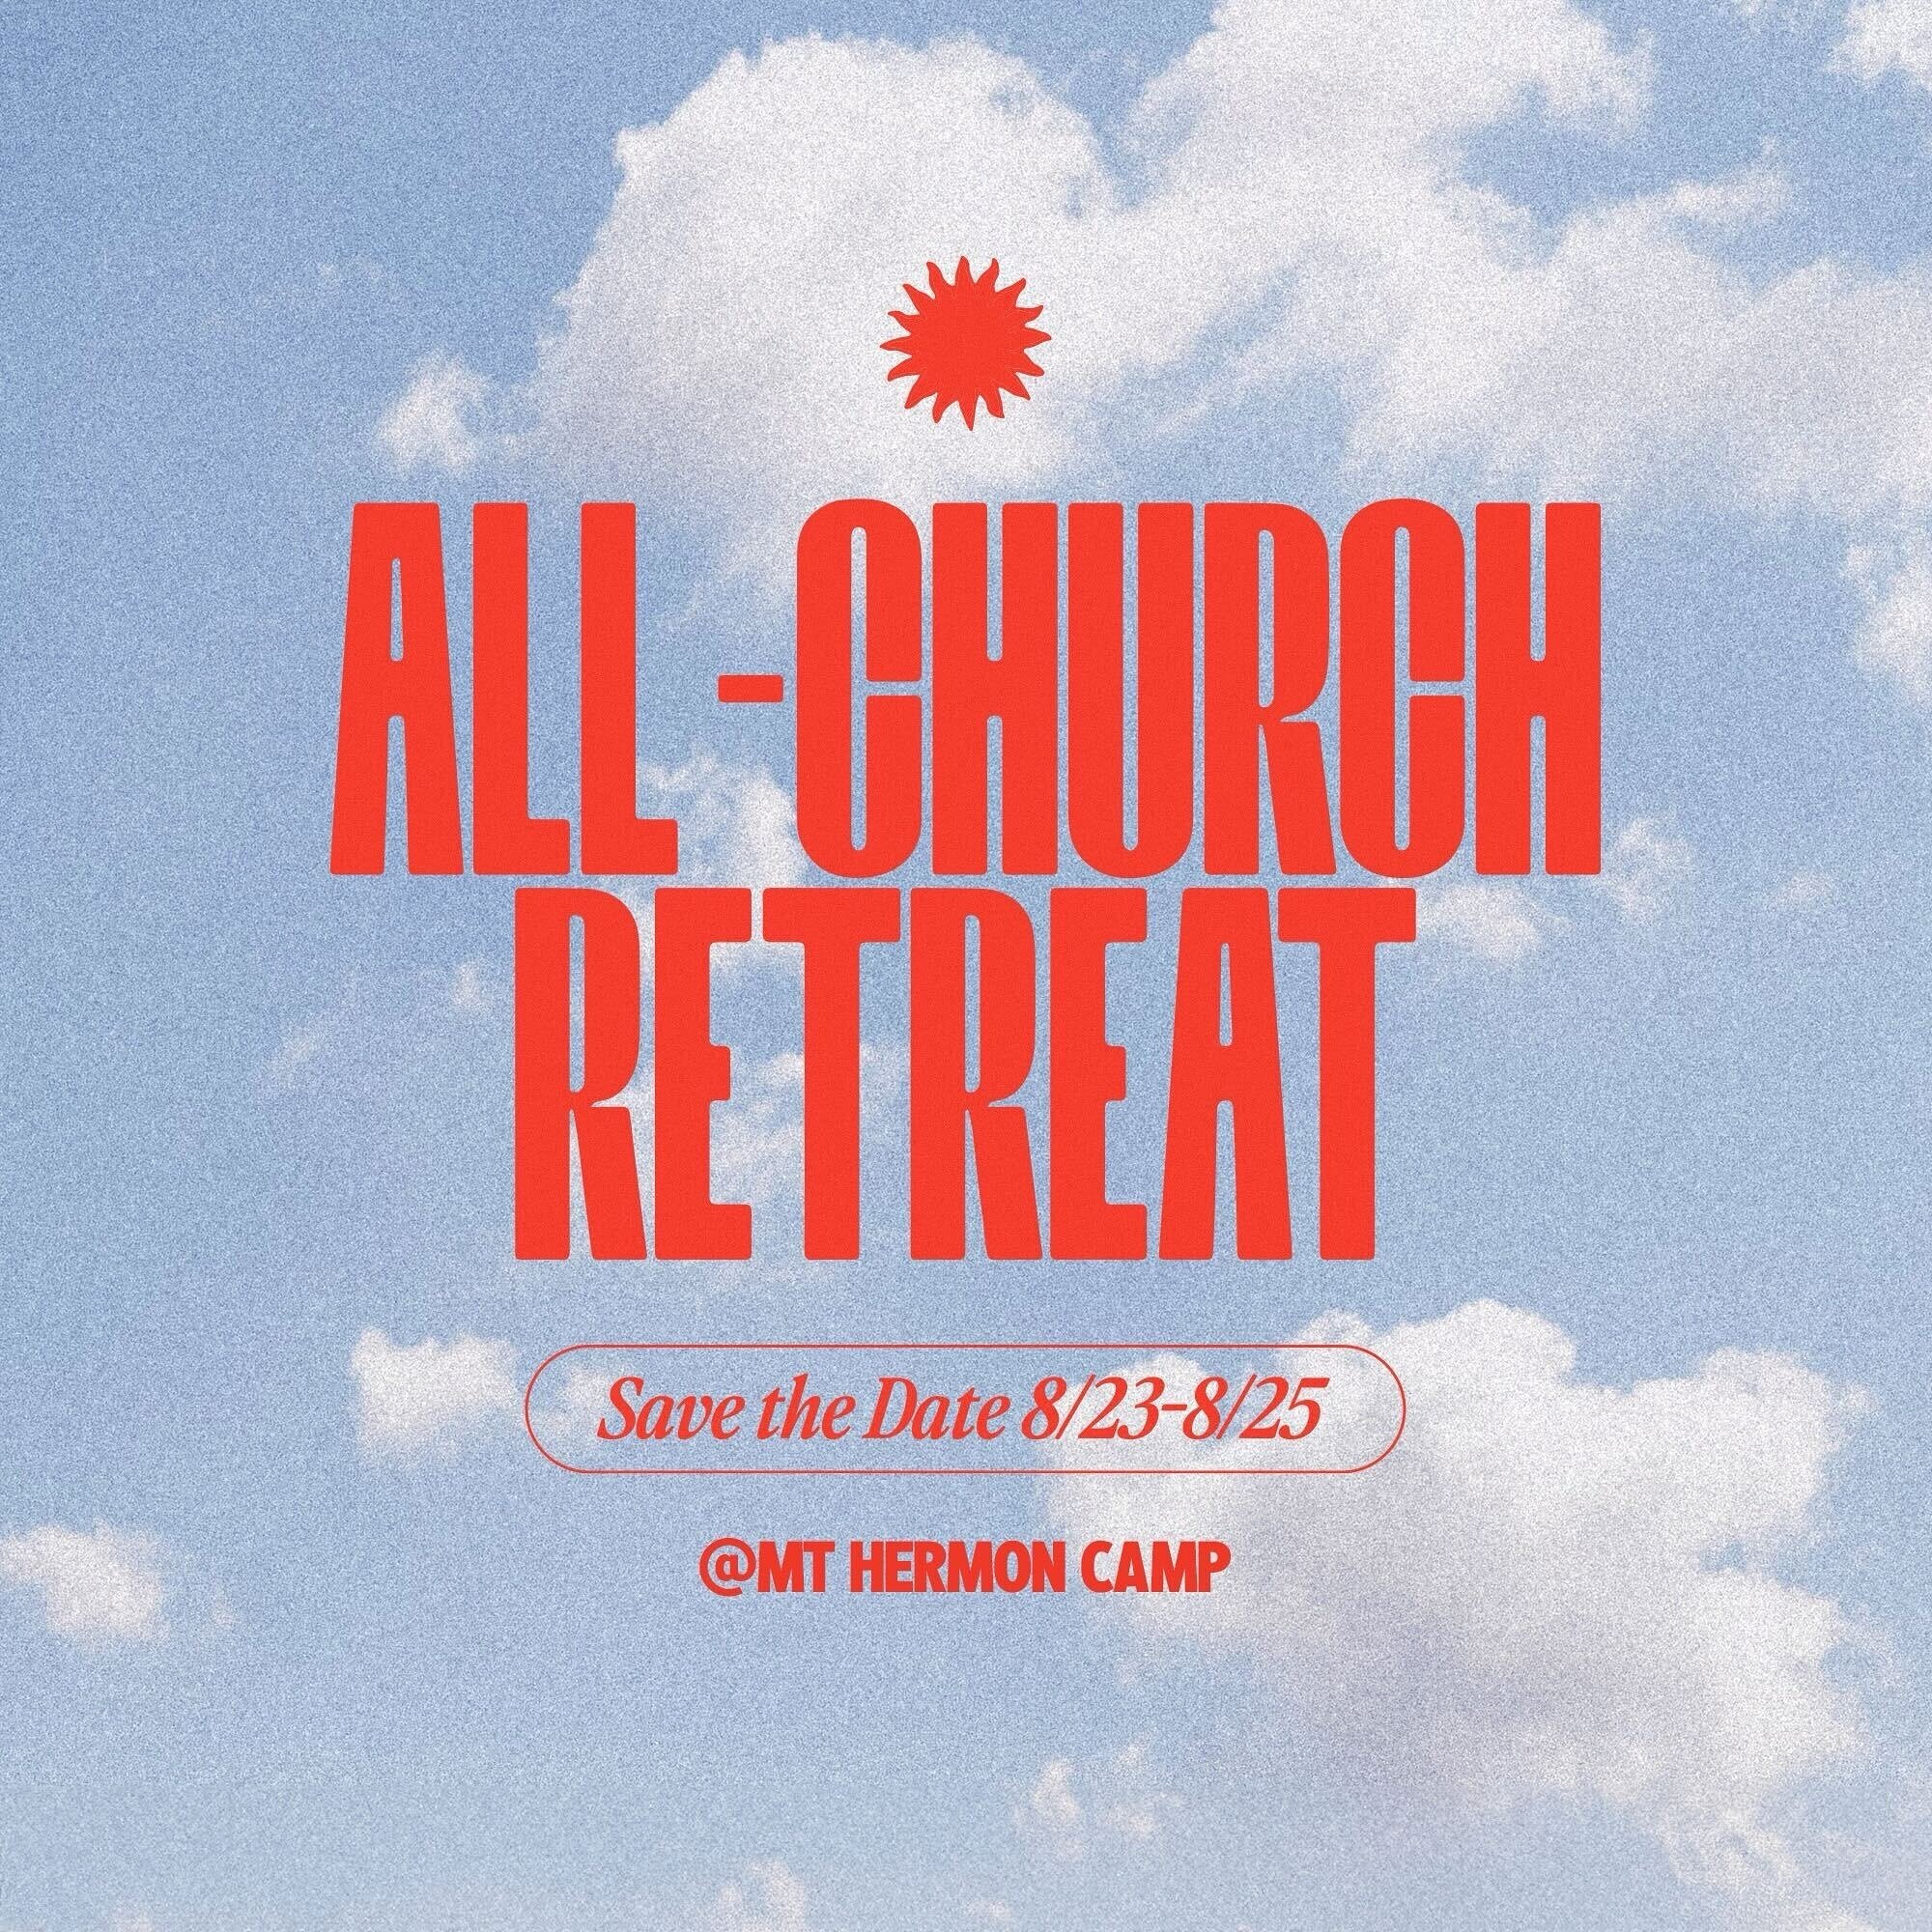 🗓️ Save the date // All-Church Retreat

More details and sign-up information will be available next month!